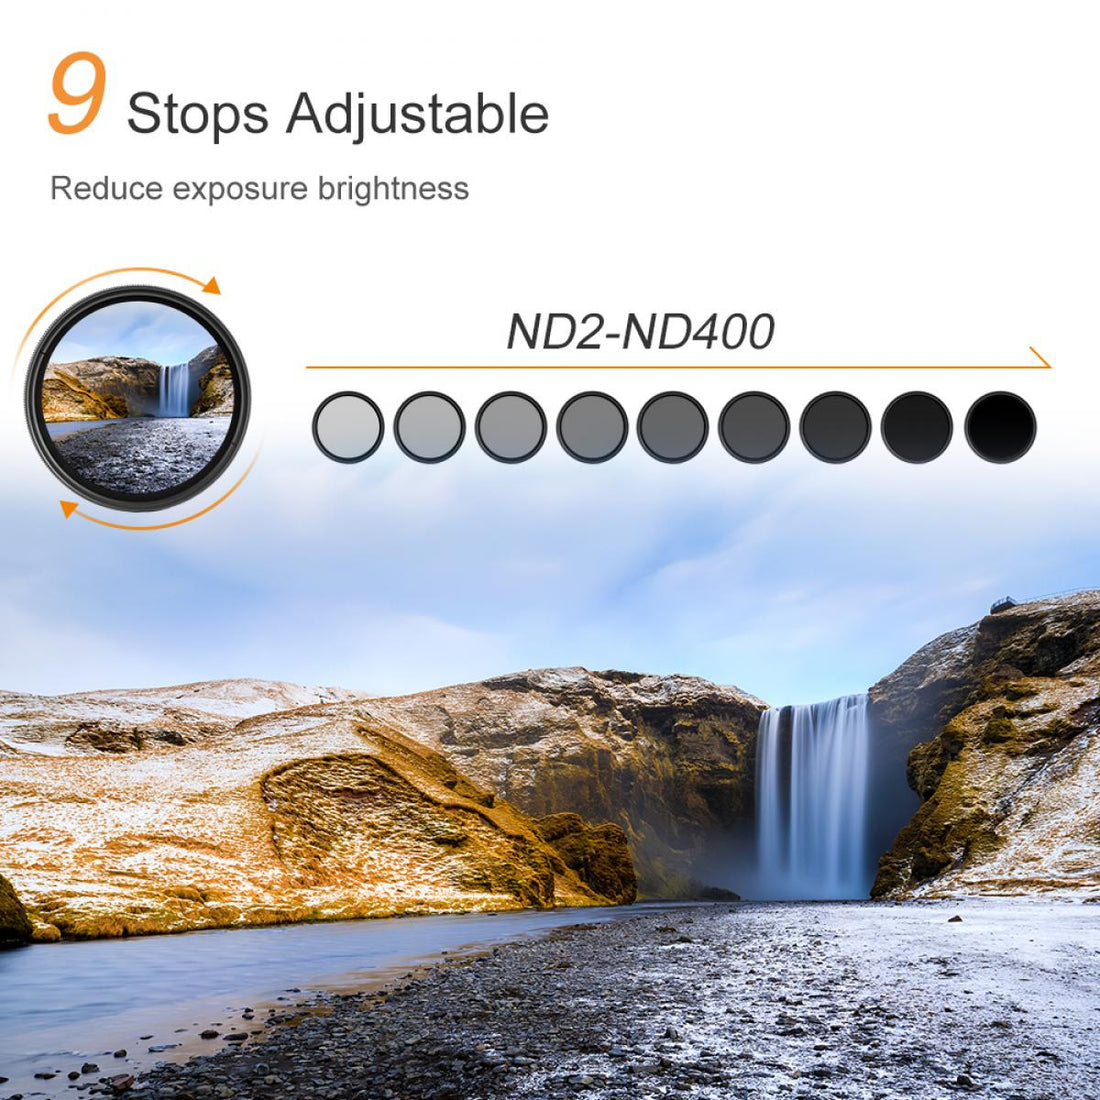 K&amp;F PRO 77mm Classic Series Slim Blue Multi Coated Variable ND2-ND400 filter-KF01.1405